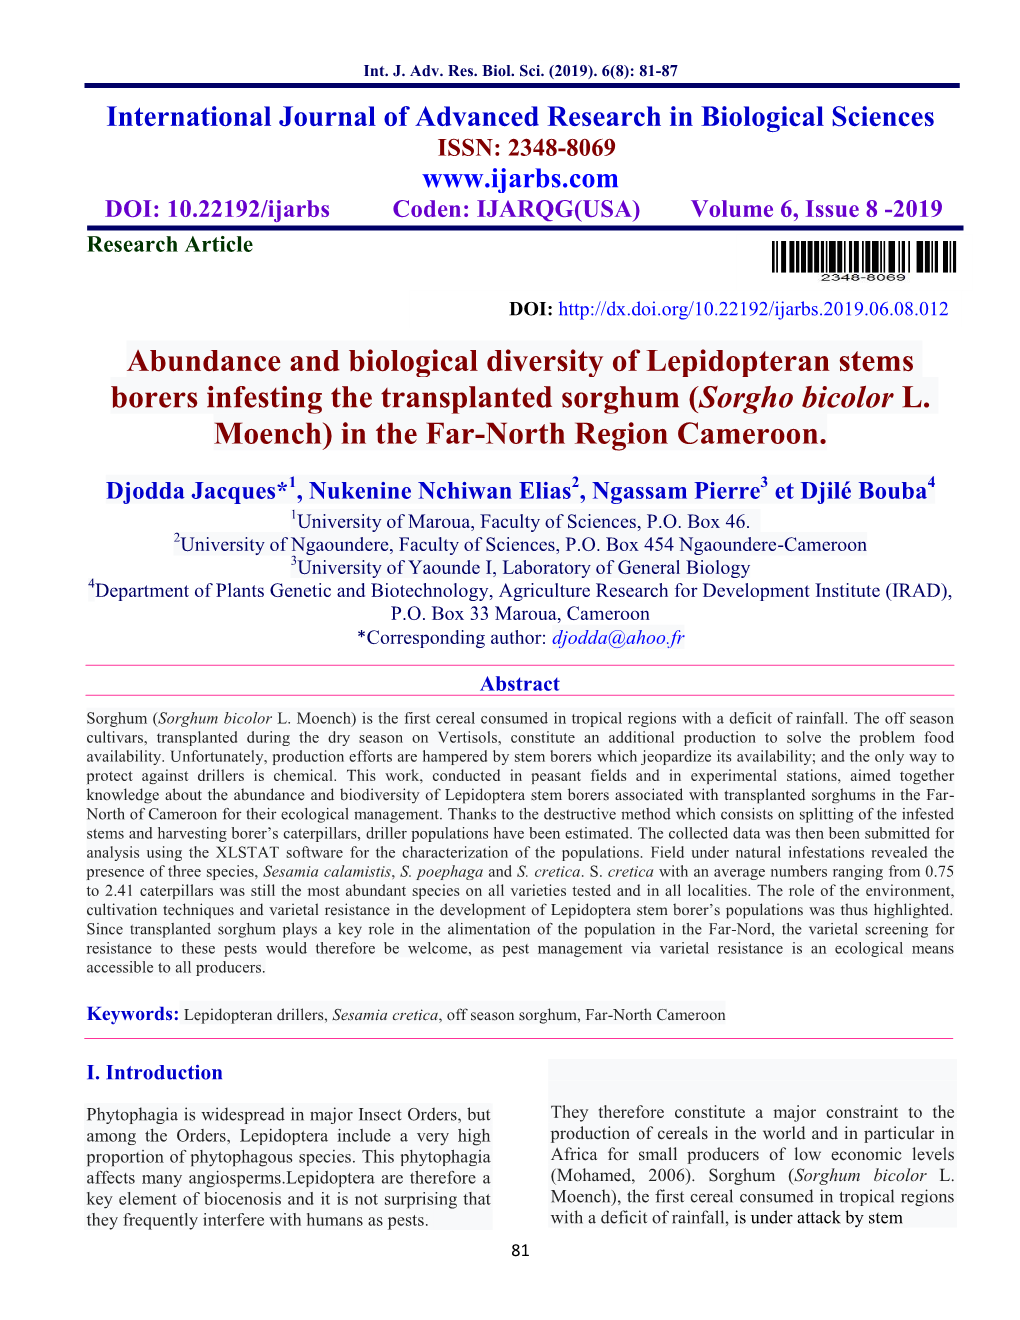 Abundance and Biological Diversity of Lepidopteran Stems Borers Infesting the Transplanted Sorghum (Sorgho Bicolor L